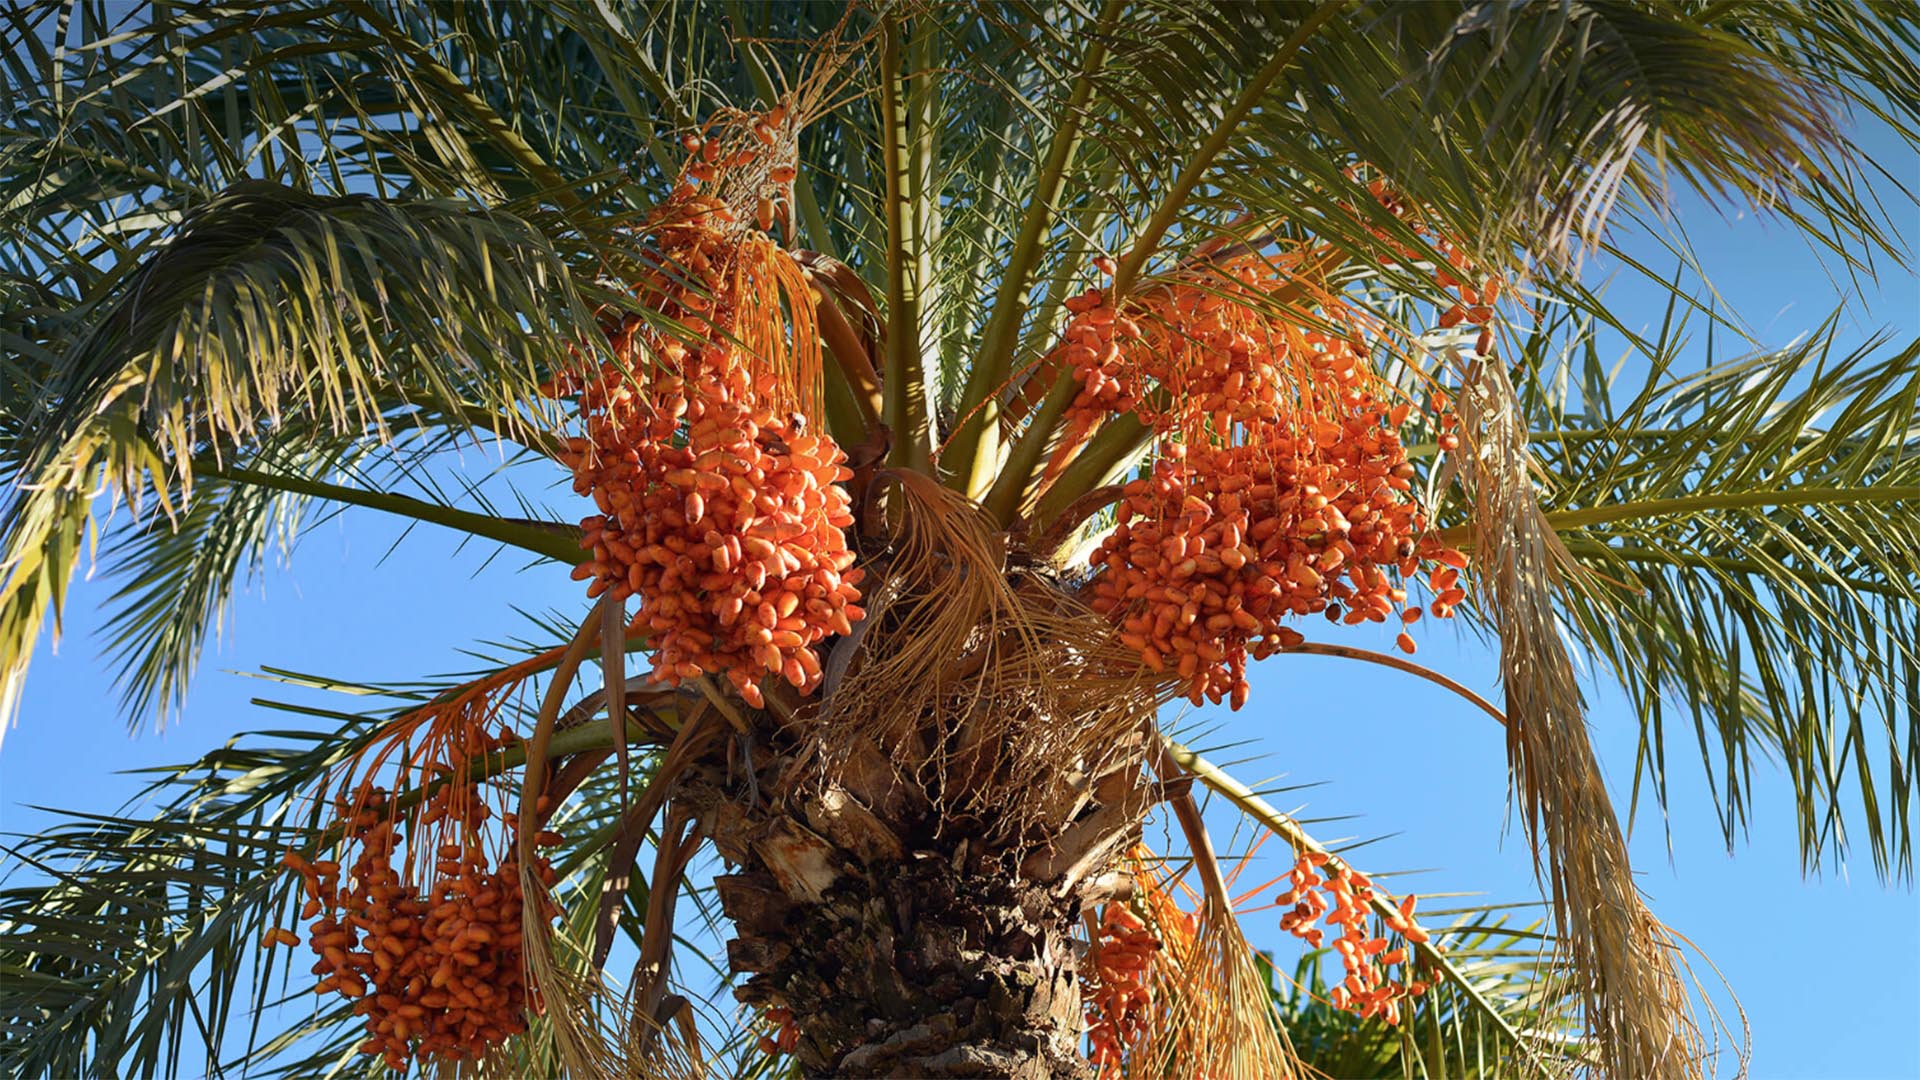 Date palm heavy with bright orange fruit